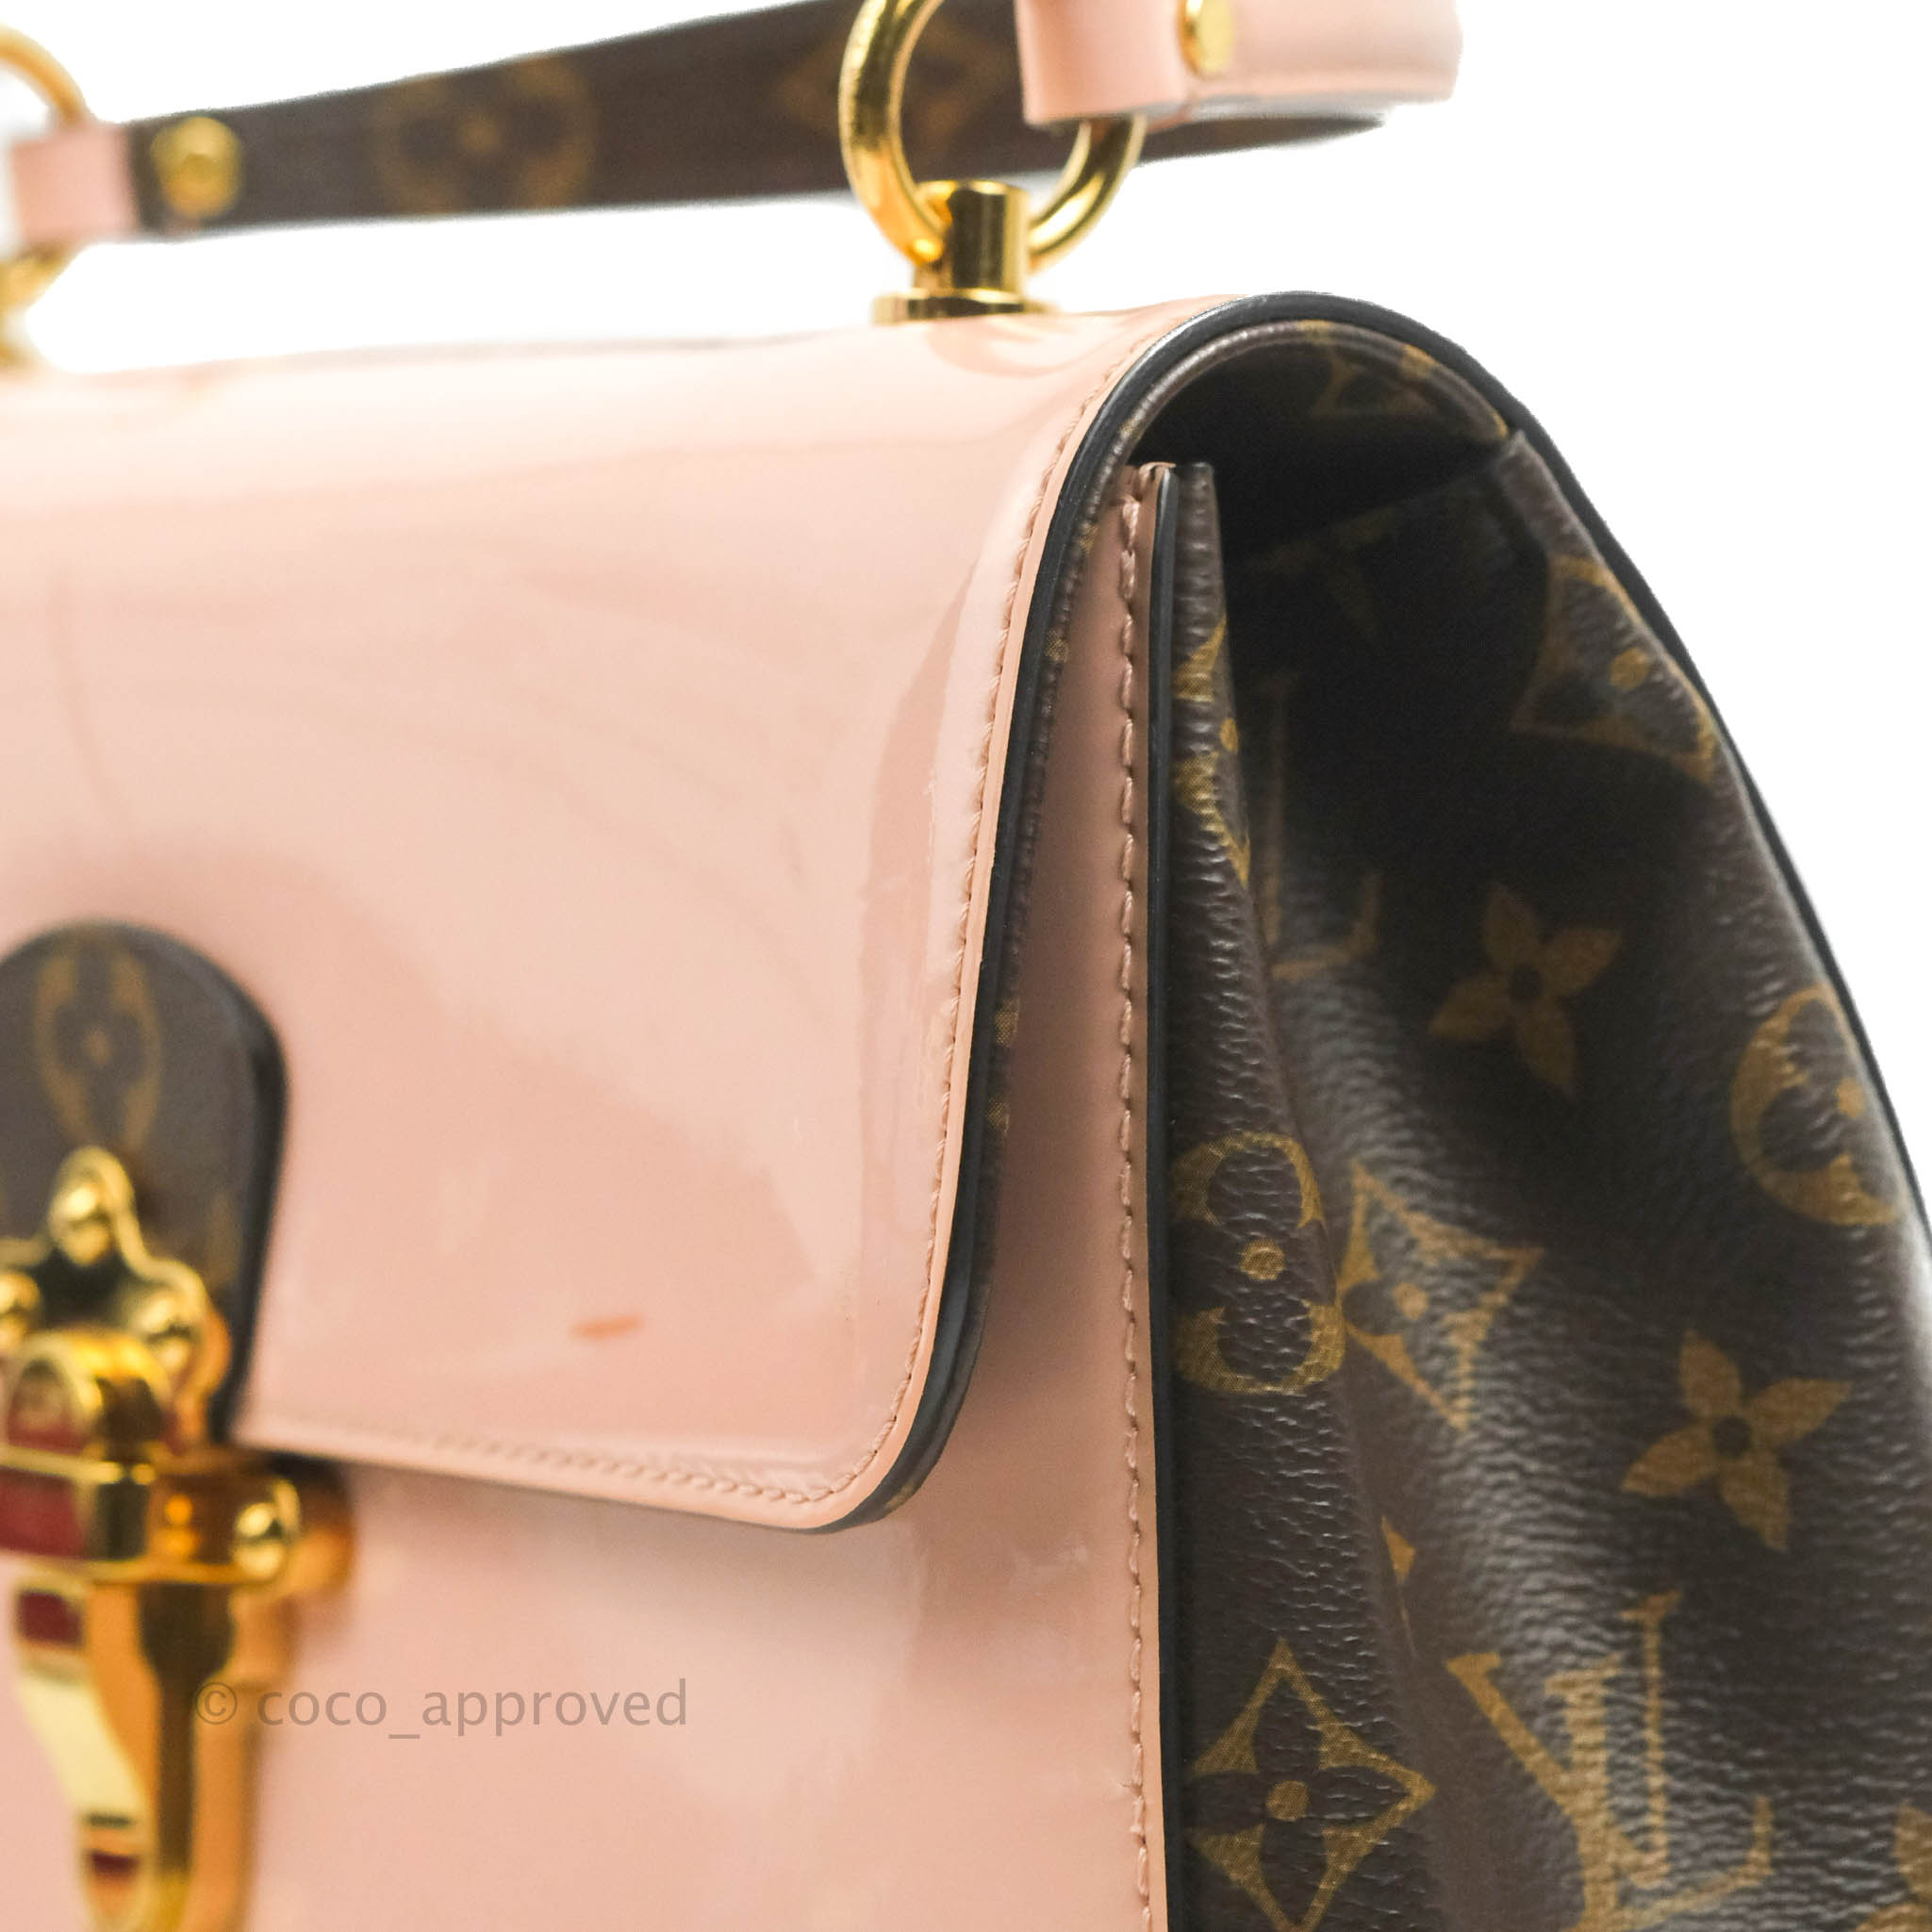 Louis Vuitton LV Women Cherrywood PM Handbag in Glossy Patent Leather -  LULUX